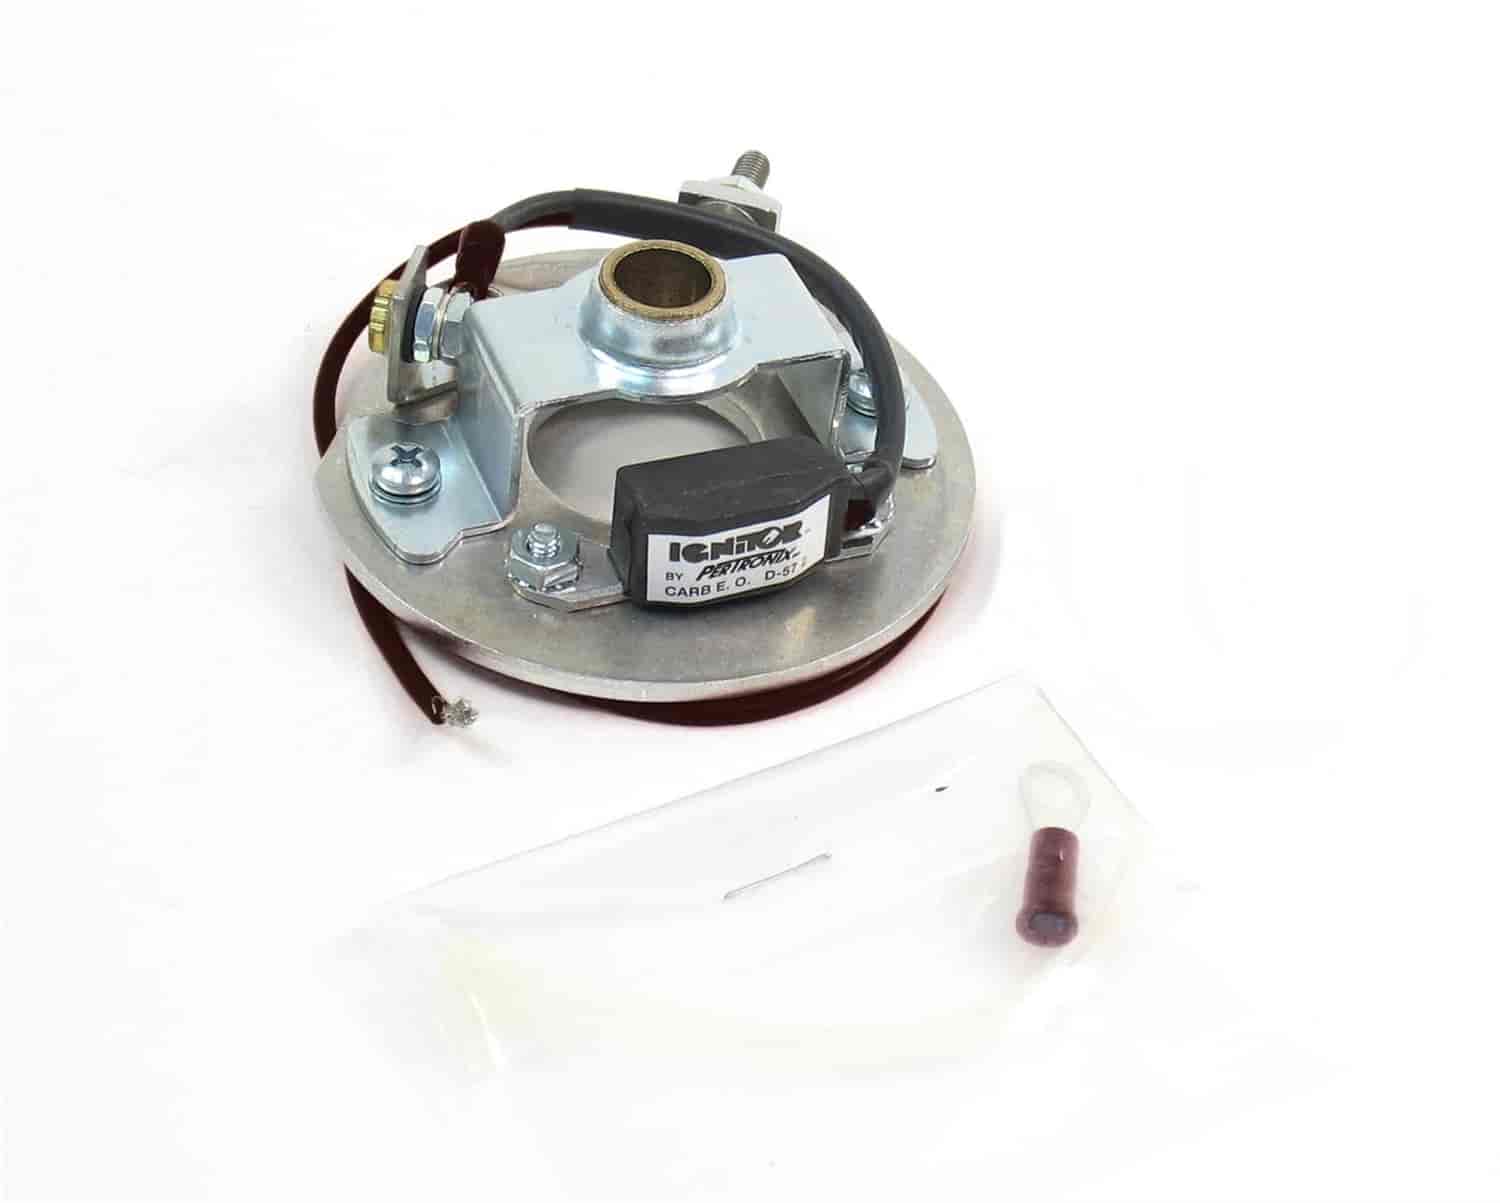 Module Pos Grd 6v 4 cyl Carb Approved D-57-22